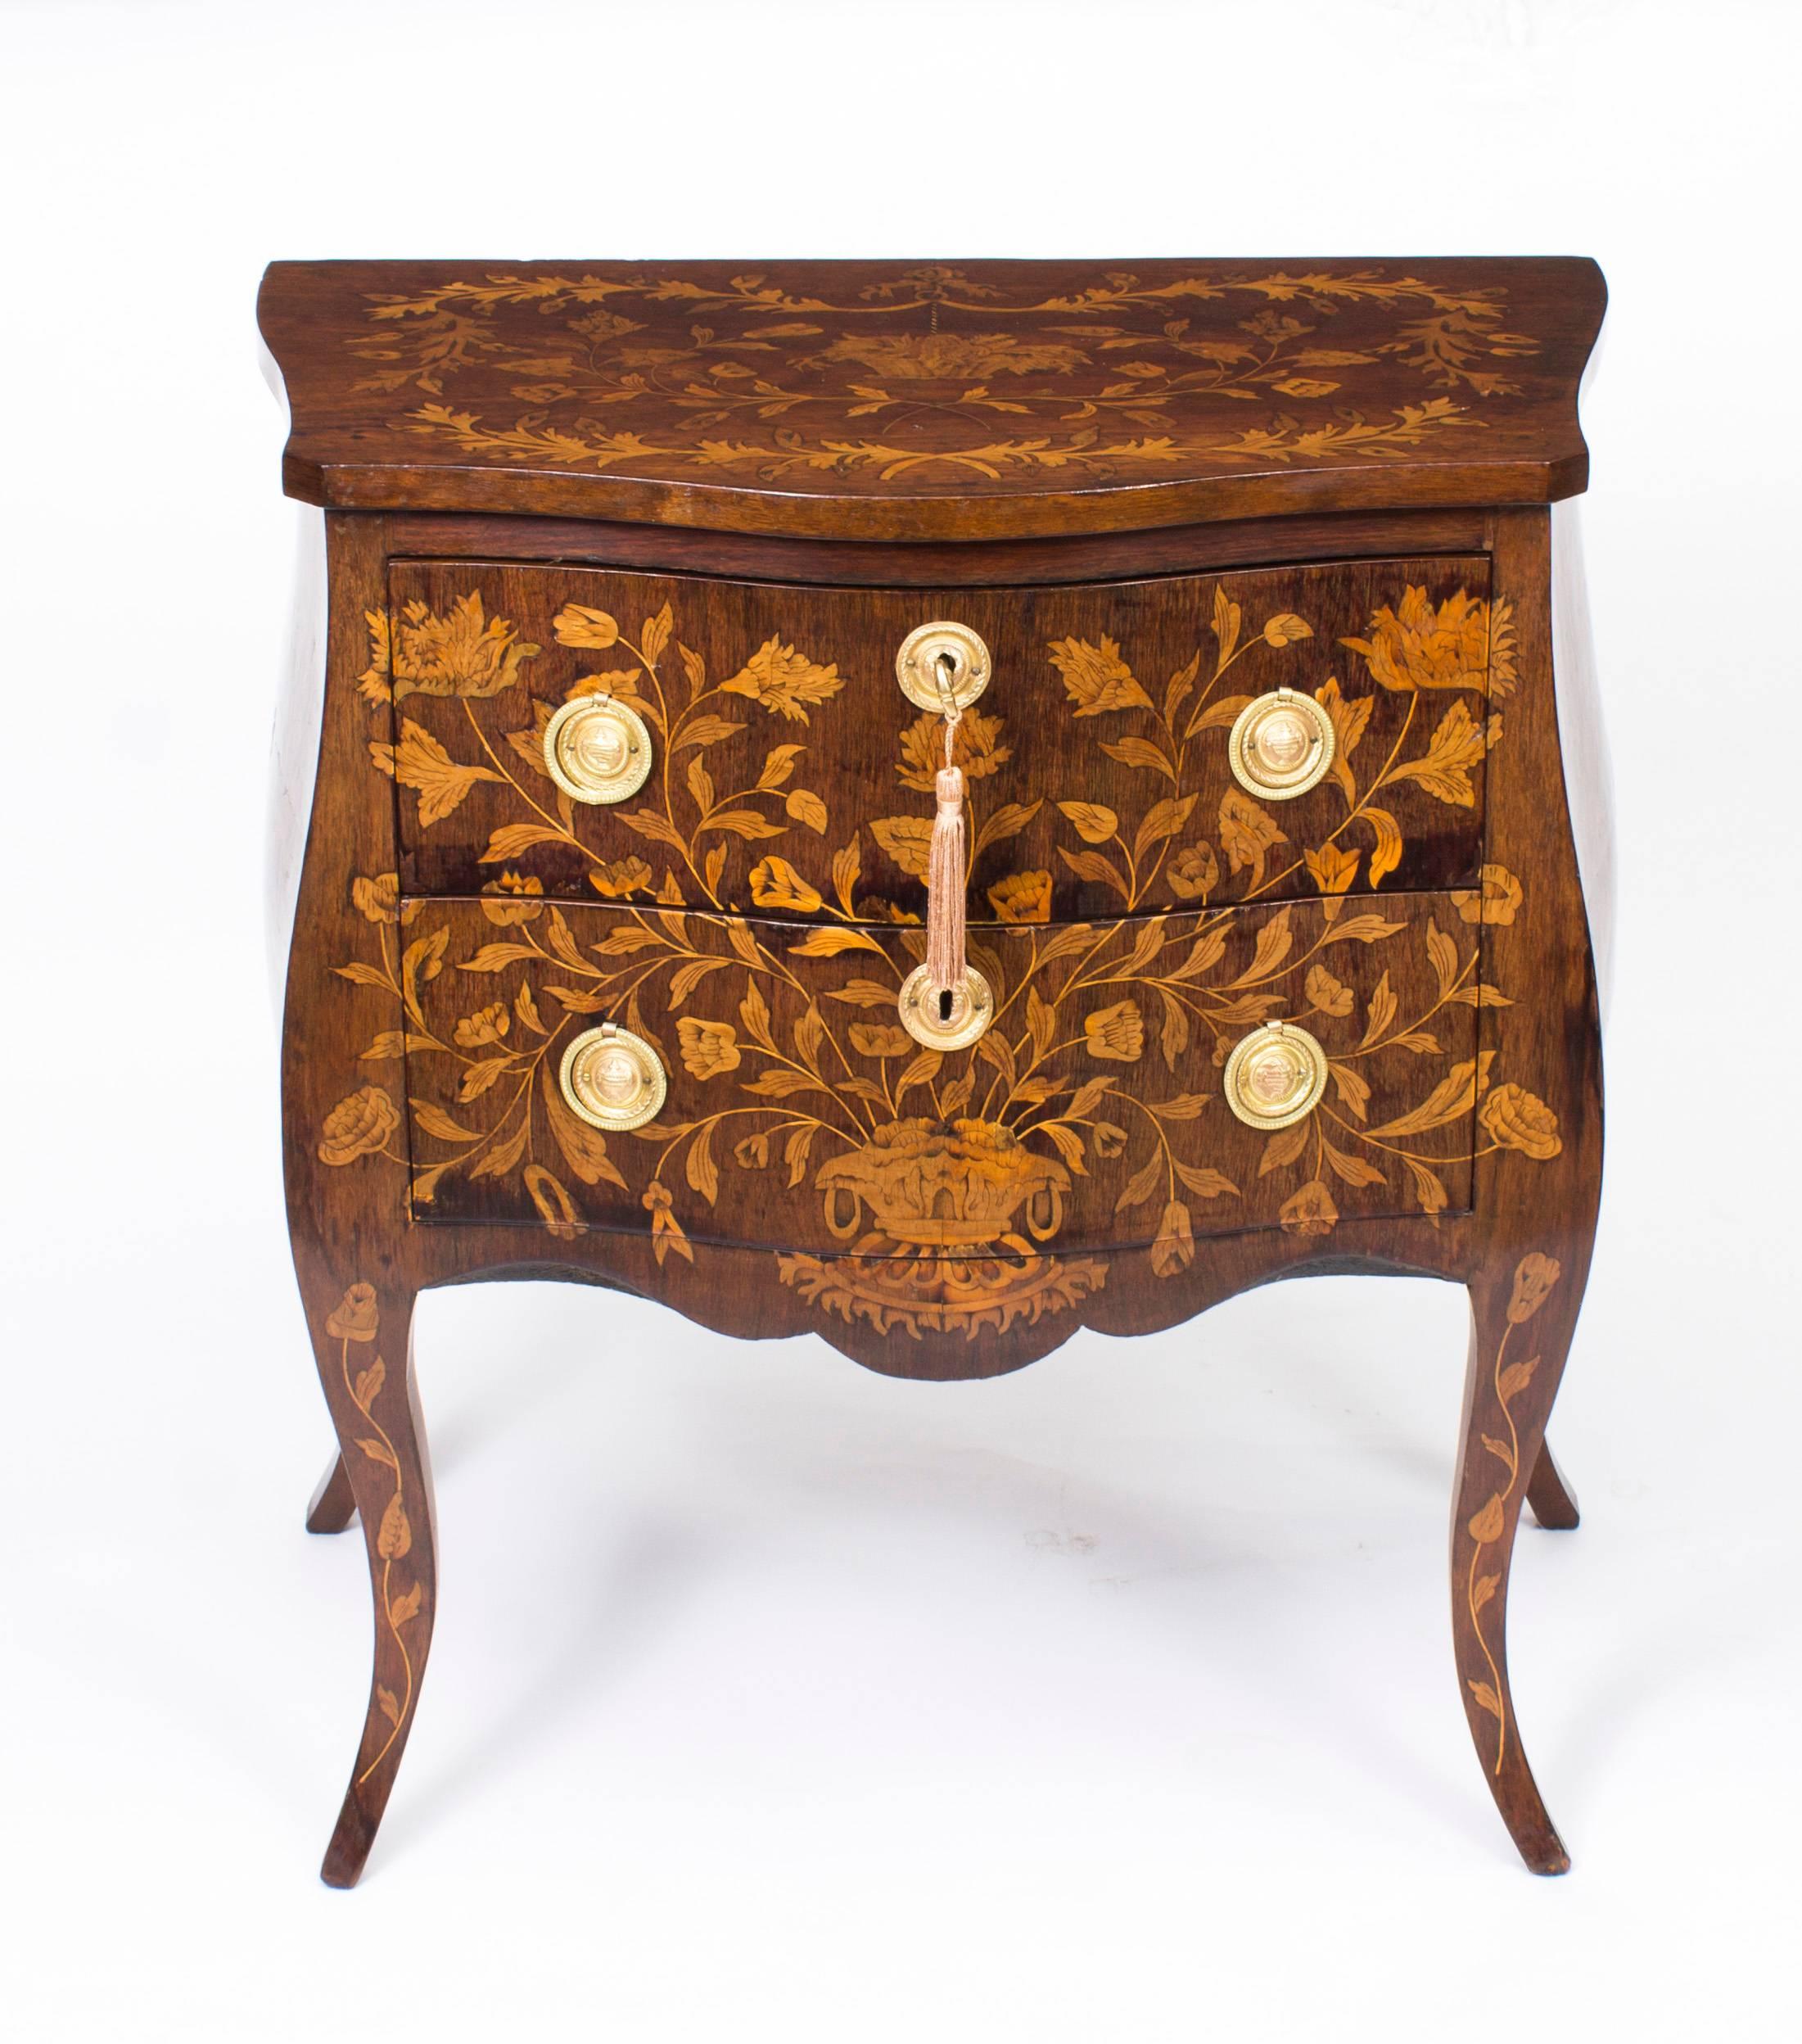 This is a stunning pair of antique Dutch marquetry bombe' bedside chests of drawers, circa 1790 in date.

The two drawer chests have been accomplished in walnut with exquisite hand-cut boxwood and fruitwood floral marquetry decoration typical of